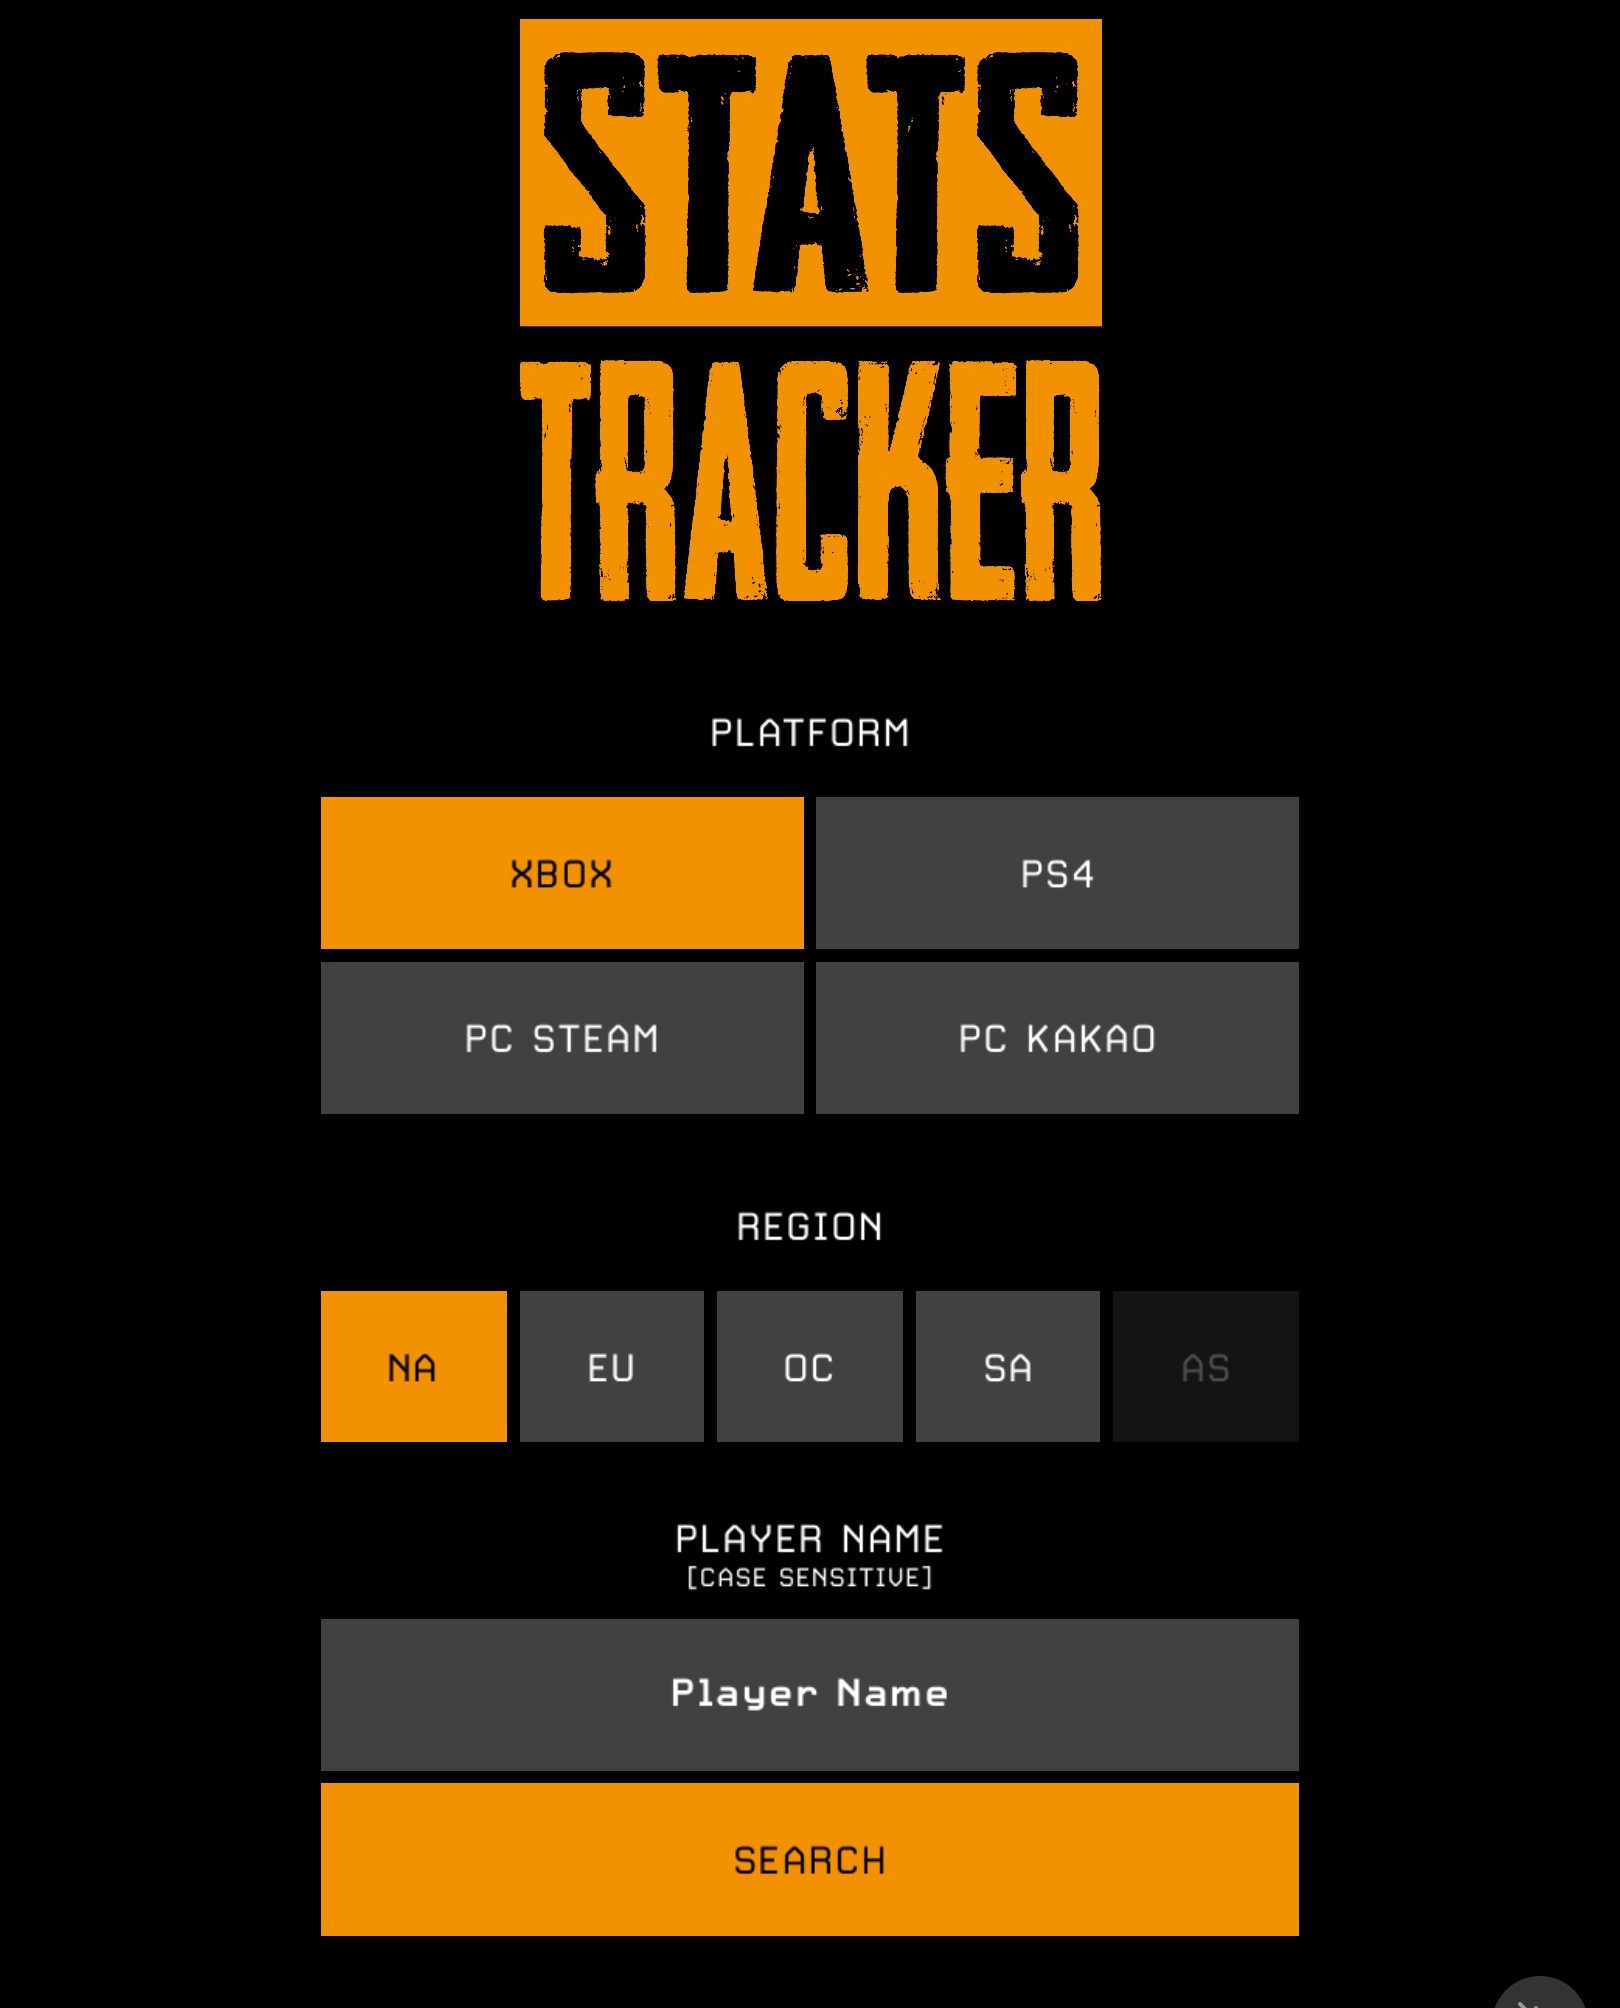 How to Track Your Stats in PUBG | Digital